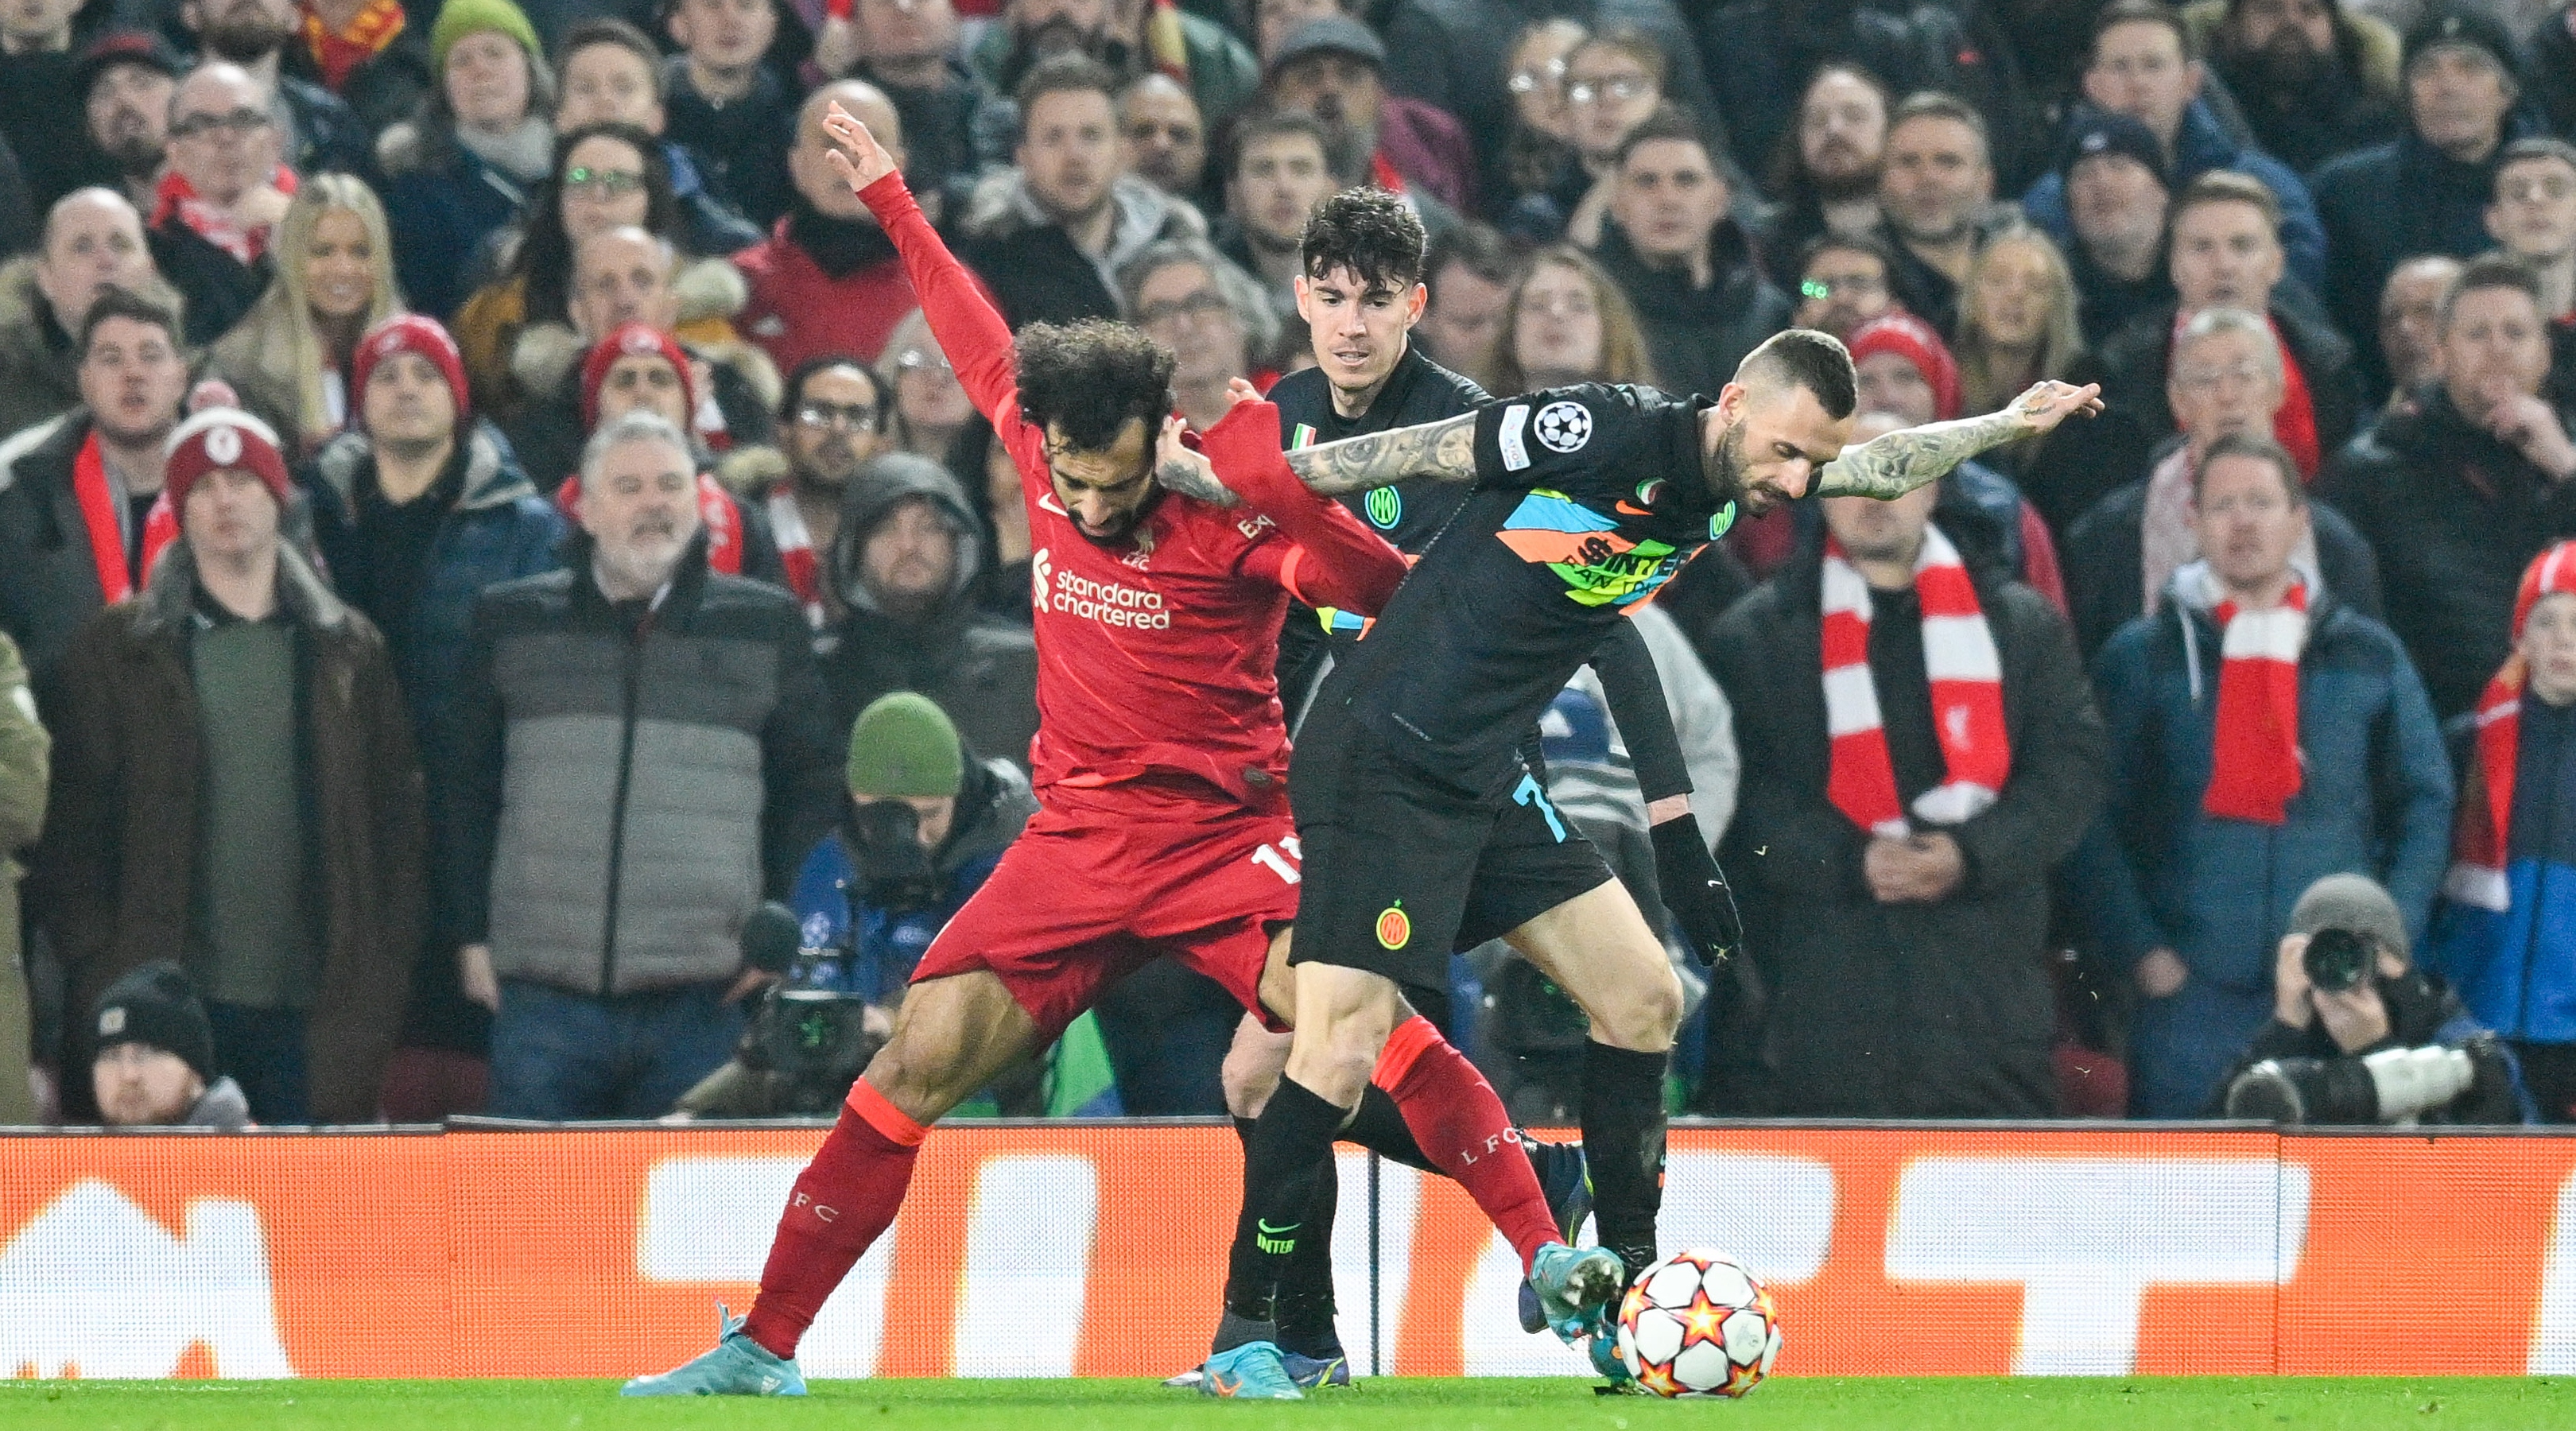 Mohamed Salah of Liverpool and Marcelo Brozovic of Inter Milan challenge for the ball during the UEFA Champions League match between Liverpool and Inter Milan on March 8, 2022 at Anfield, Liverpool, UK